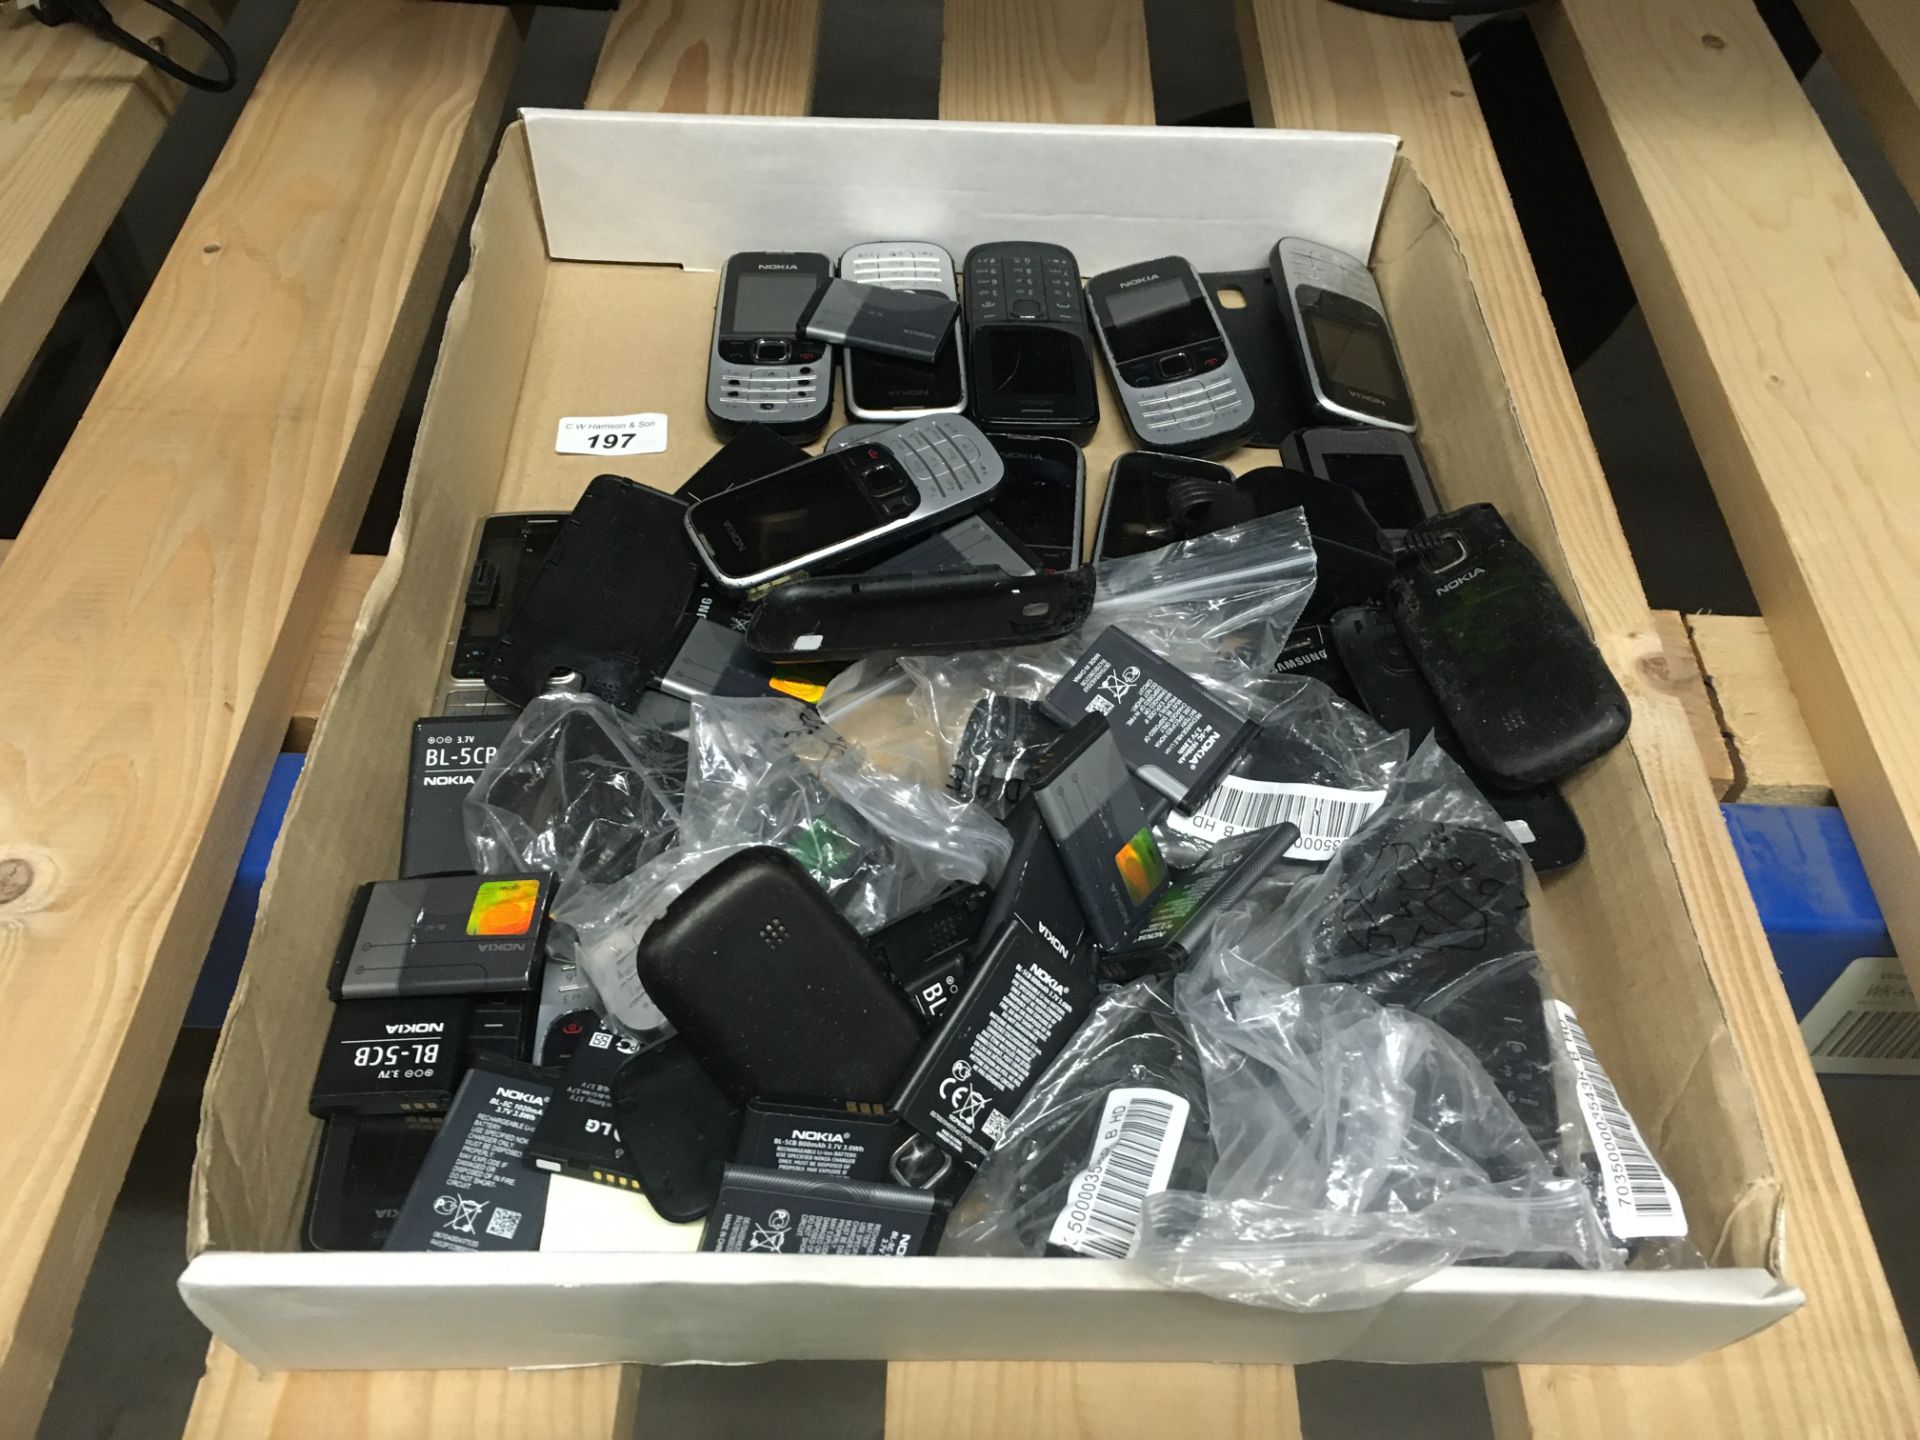 20 x assorted mobile phones - no charger